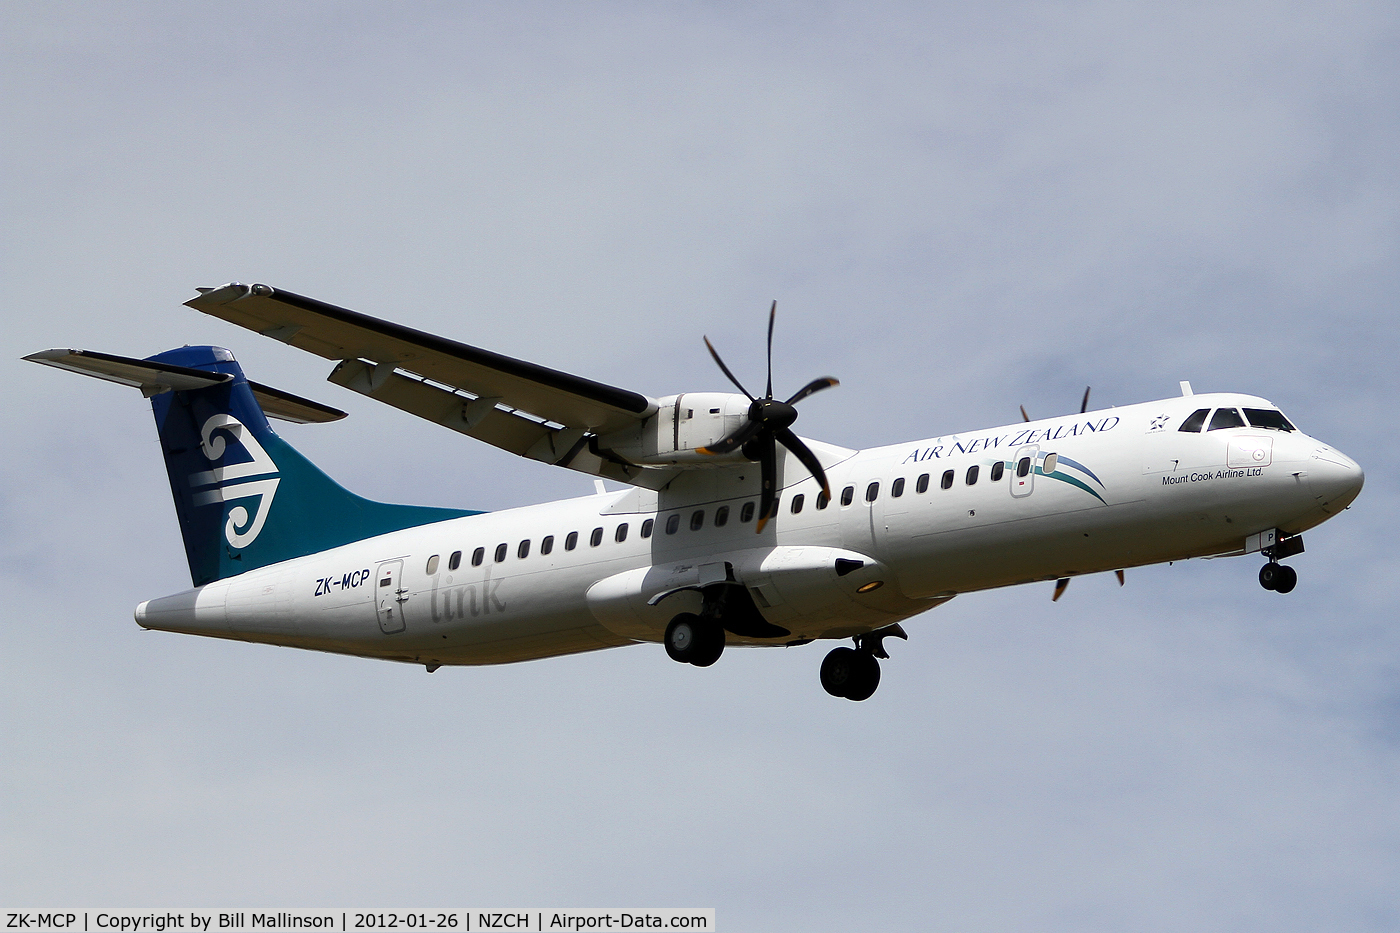 ZK-MCP, 2000 ATR 72-212A C/N 630, finals to 20